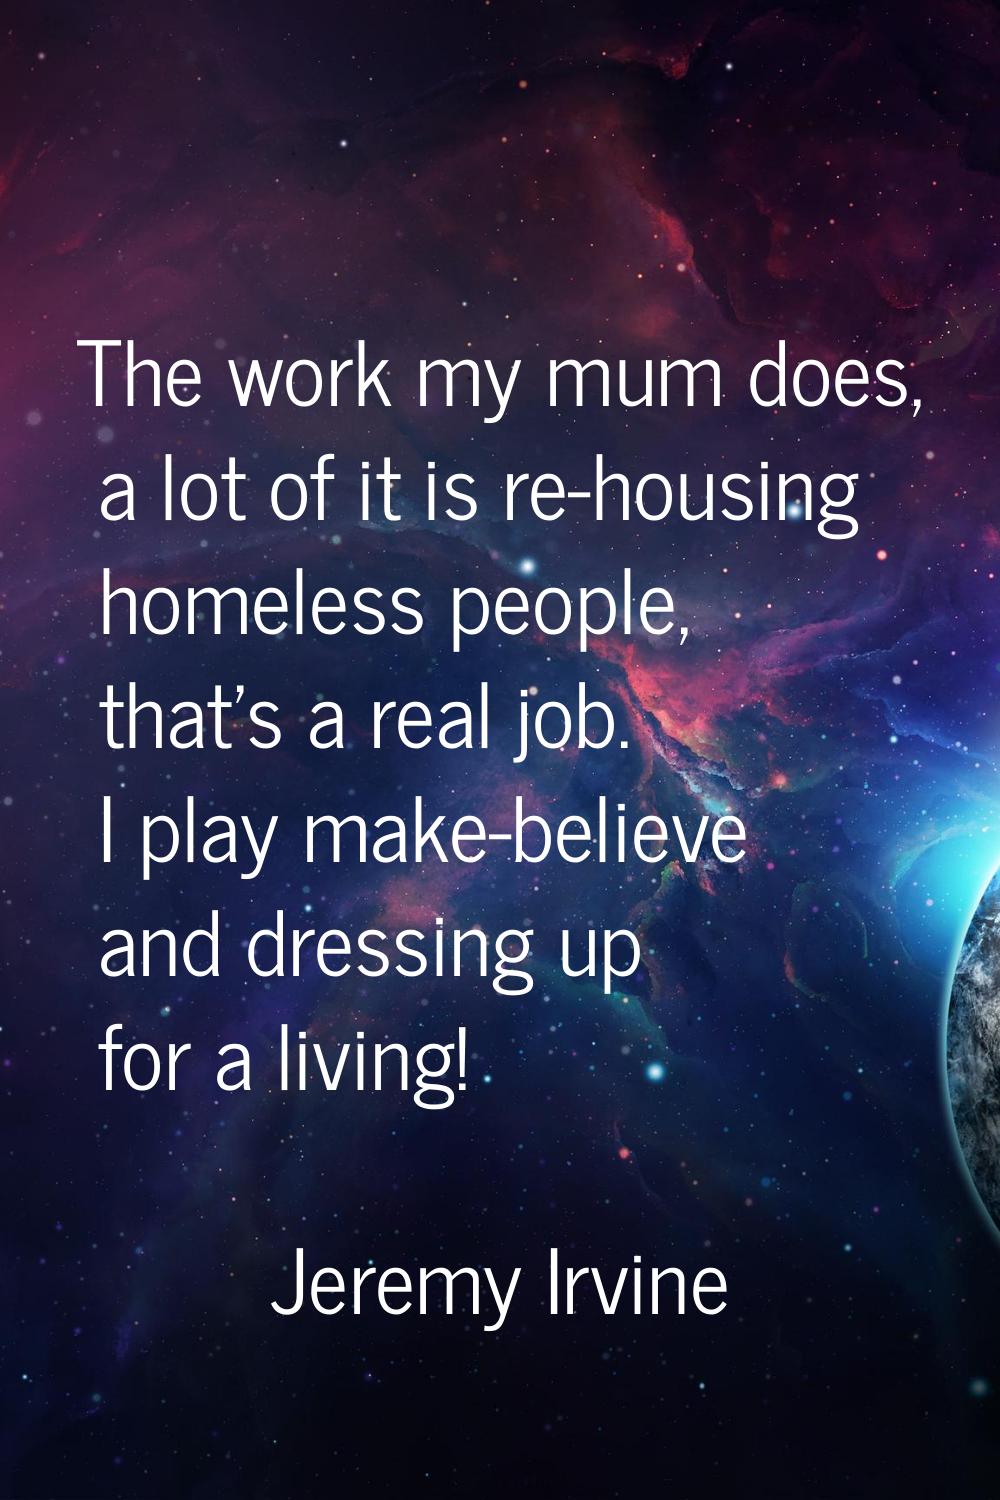 The work my mum does, a lot of it is re-housing homeless people, that's a real job. I play make-bel